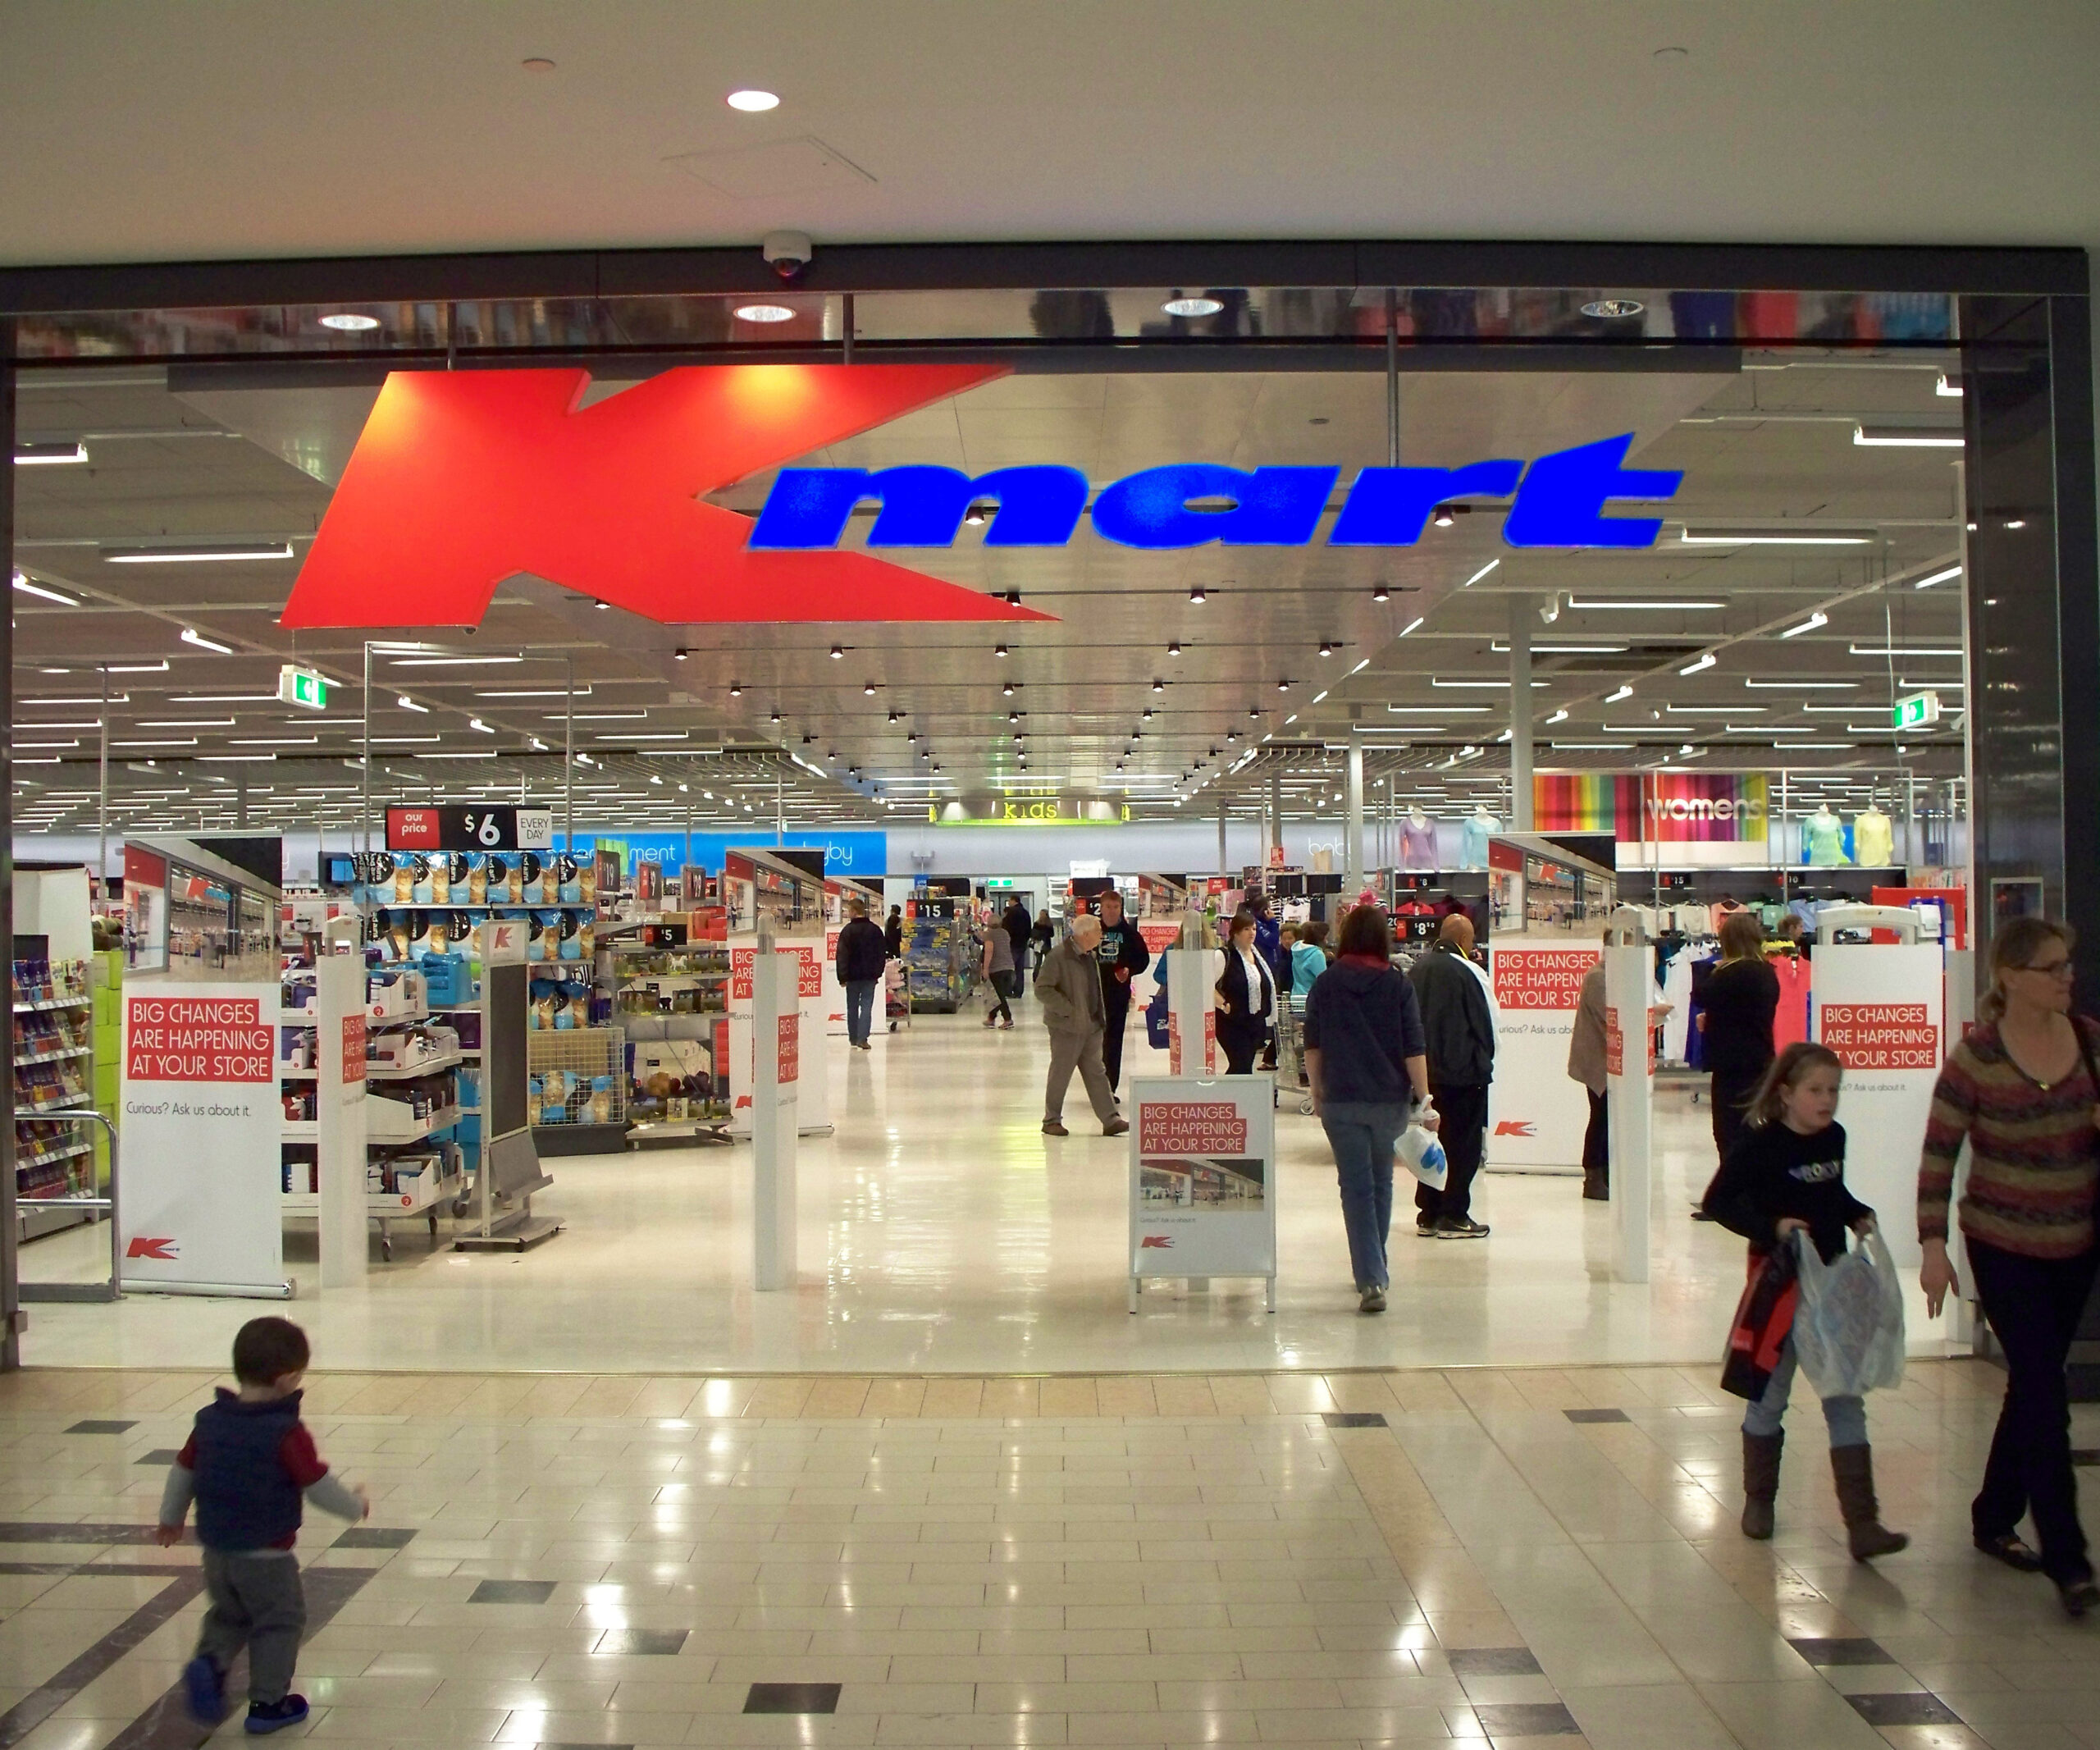 Mother told breastfeeding is “unhygienic and wrong” by Kmart staff